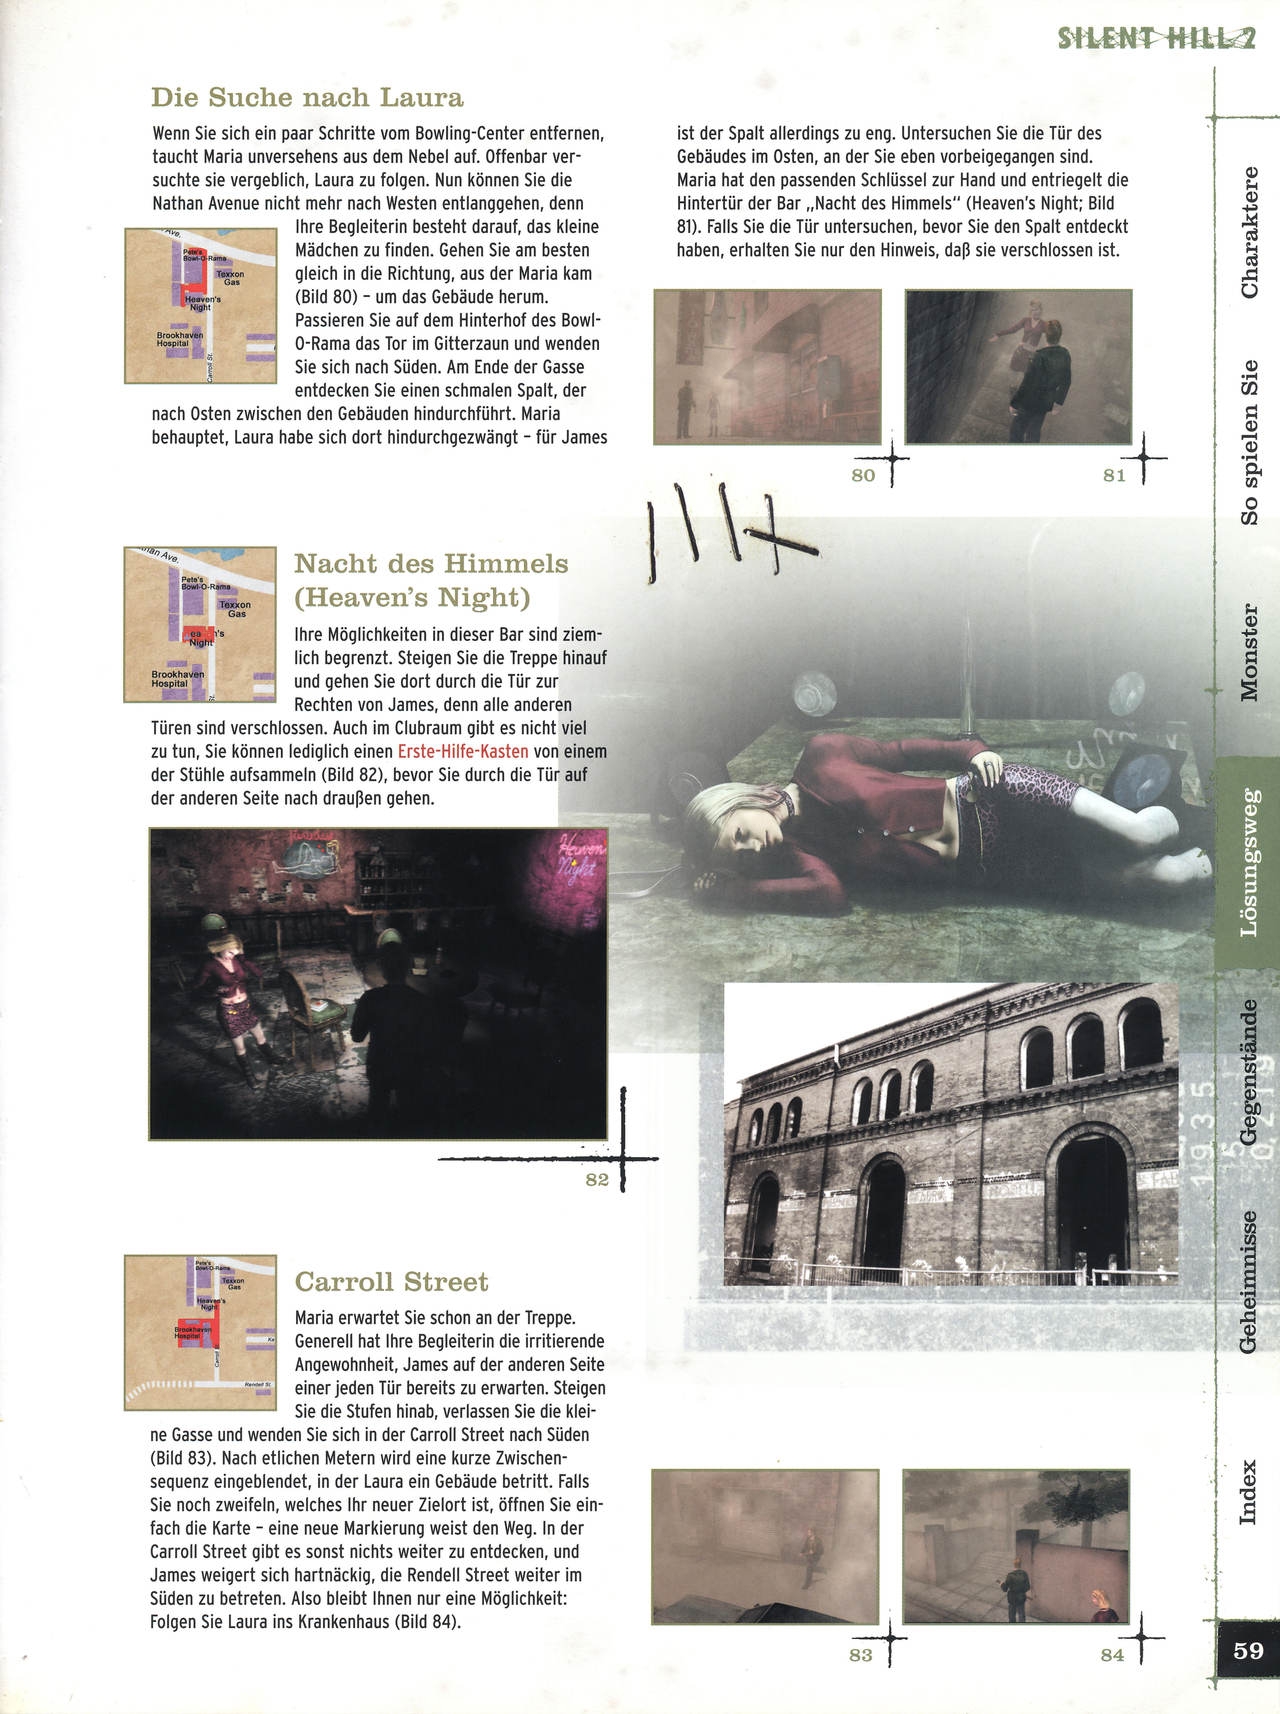 Silent Hill 2 Official Strategy Guide Authoritzed Collection 58